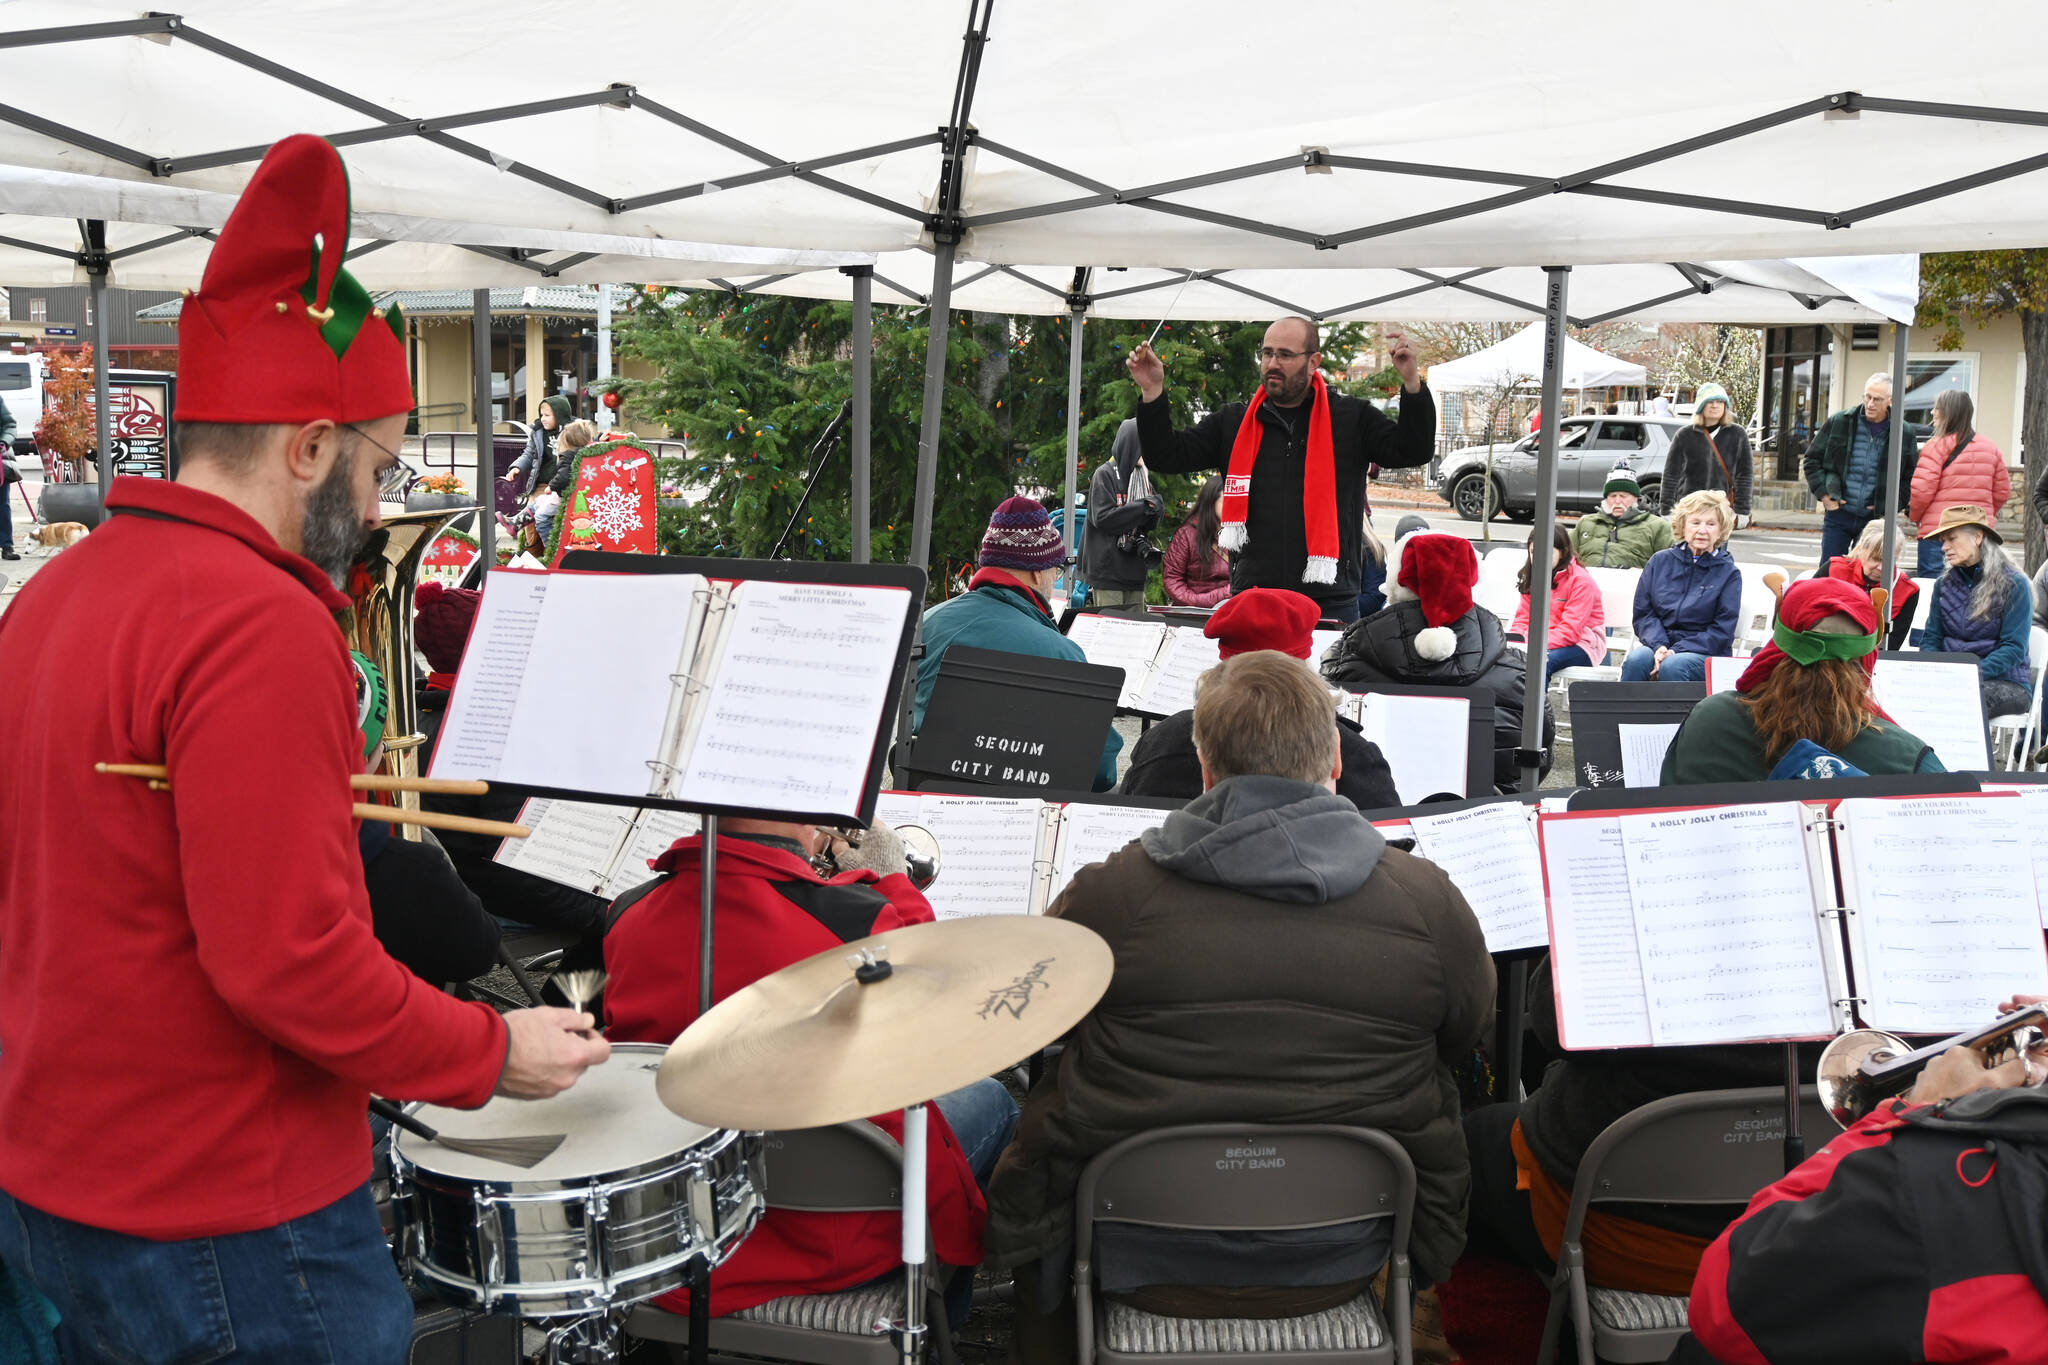 The Sequim City Band plays holiday-themed songs at Centennial Place on Saturday, as part of the live music at the Hometown Holidays event in downtown Sequim.